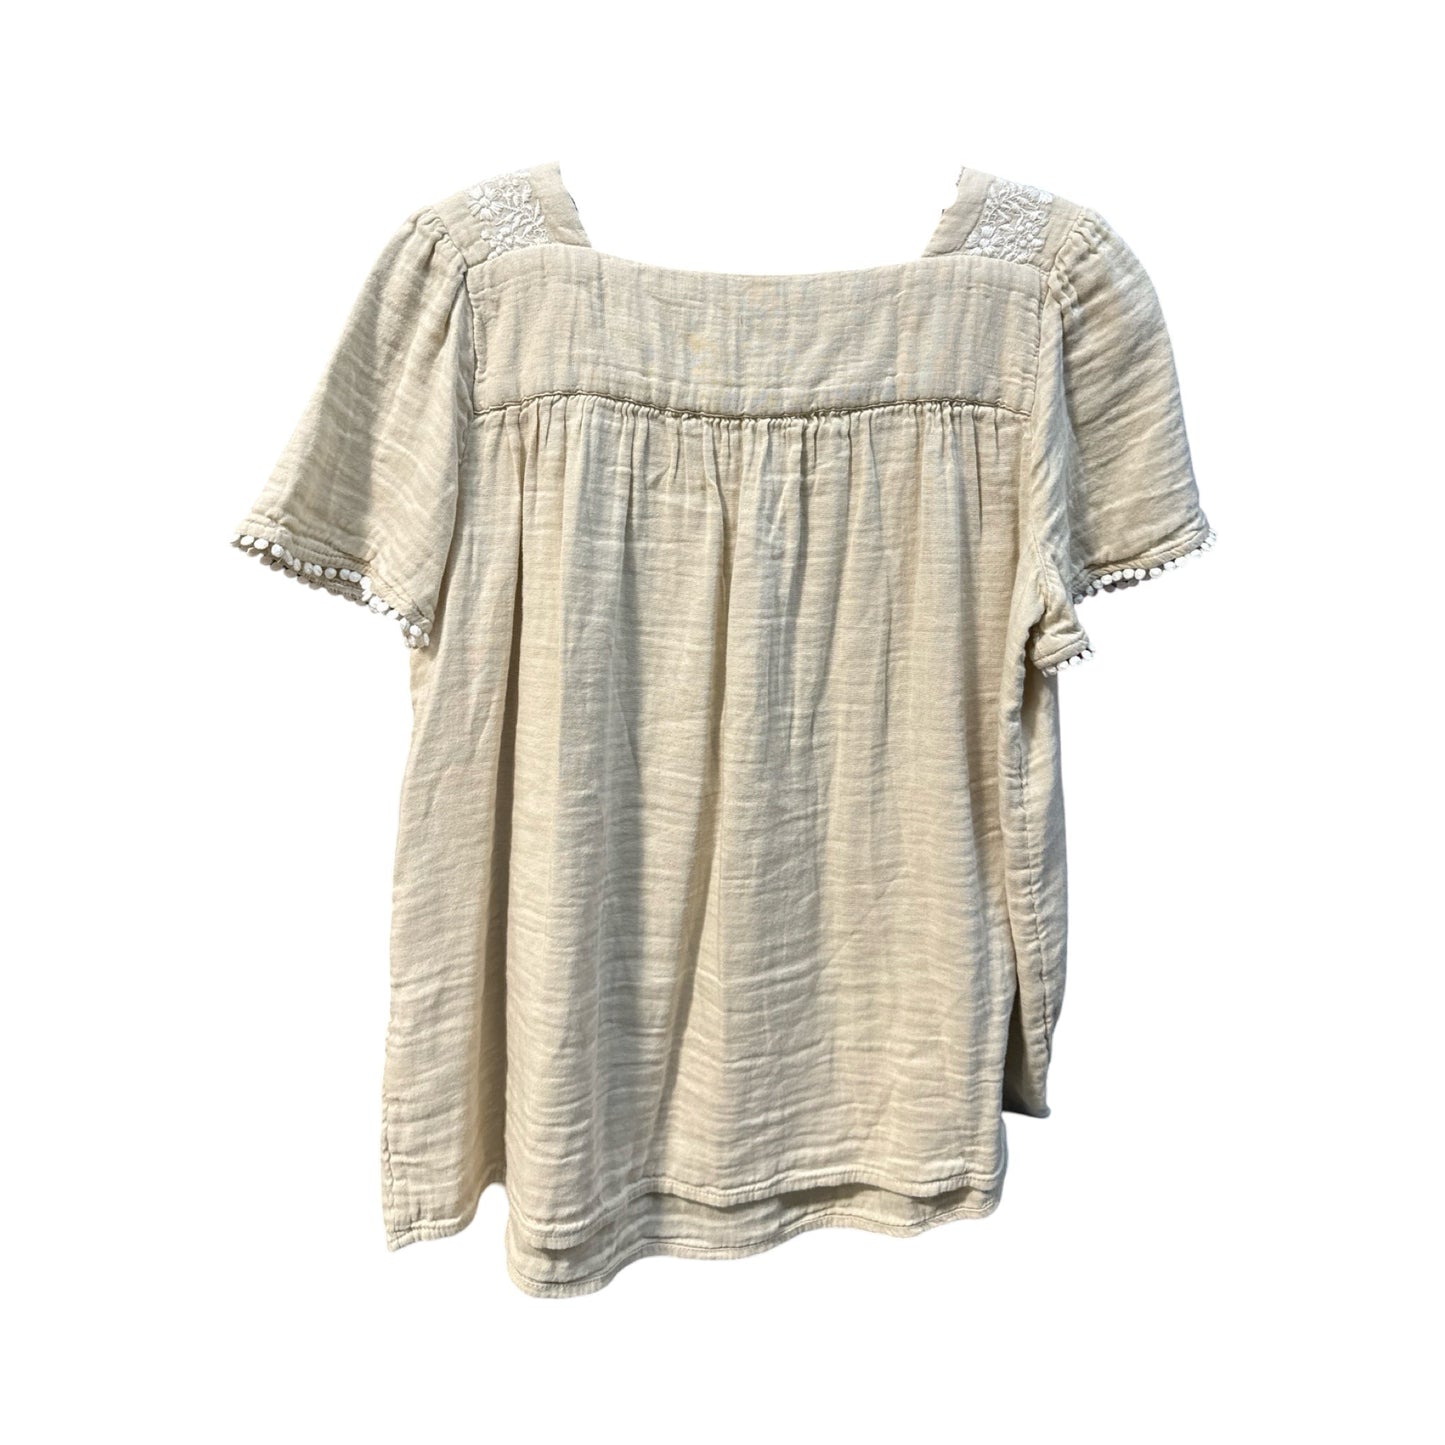 Cream Top Short Sleeve Old Navy, Size S